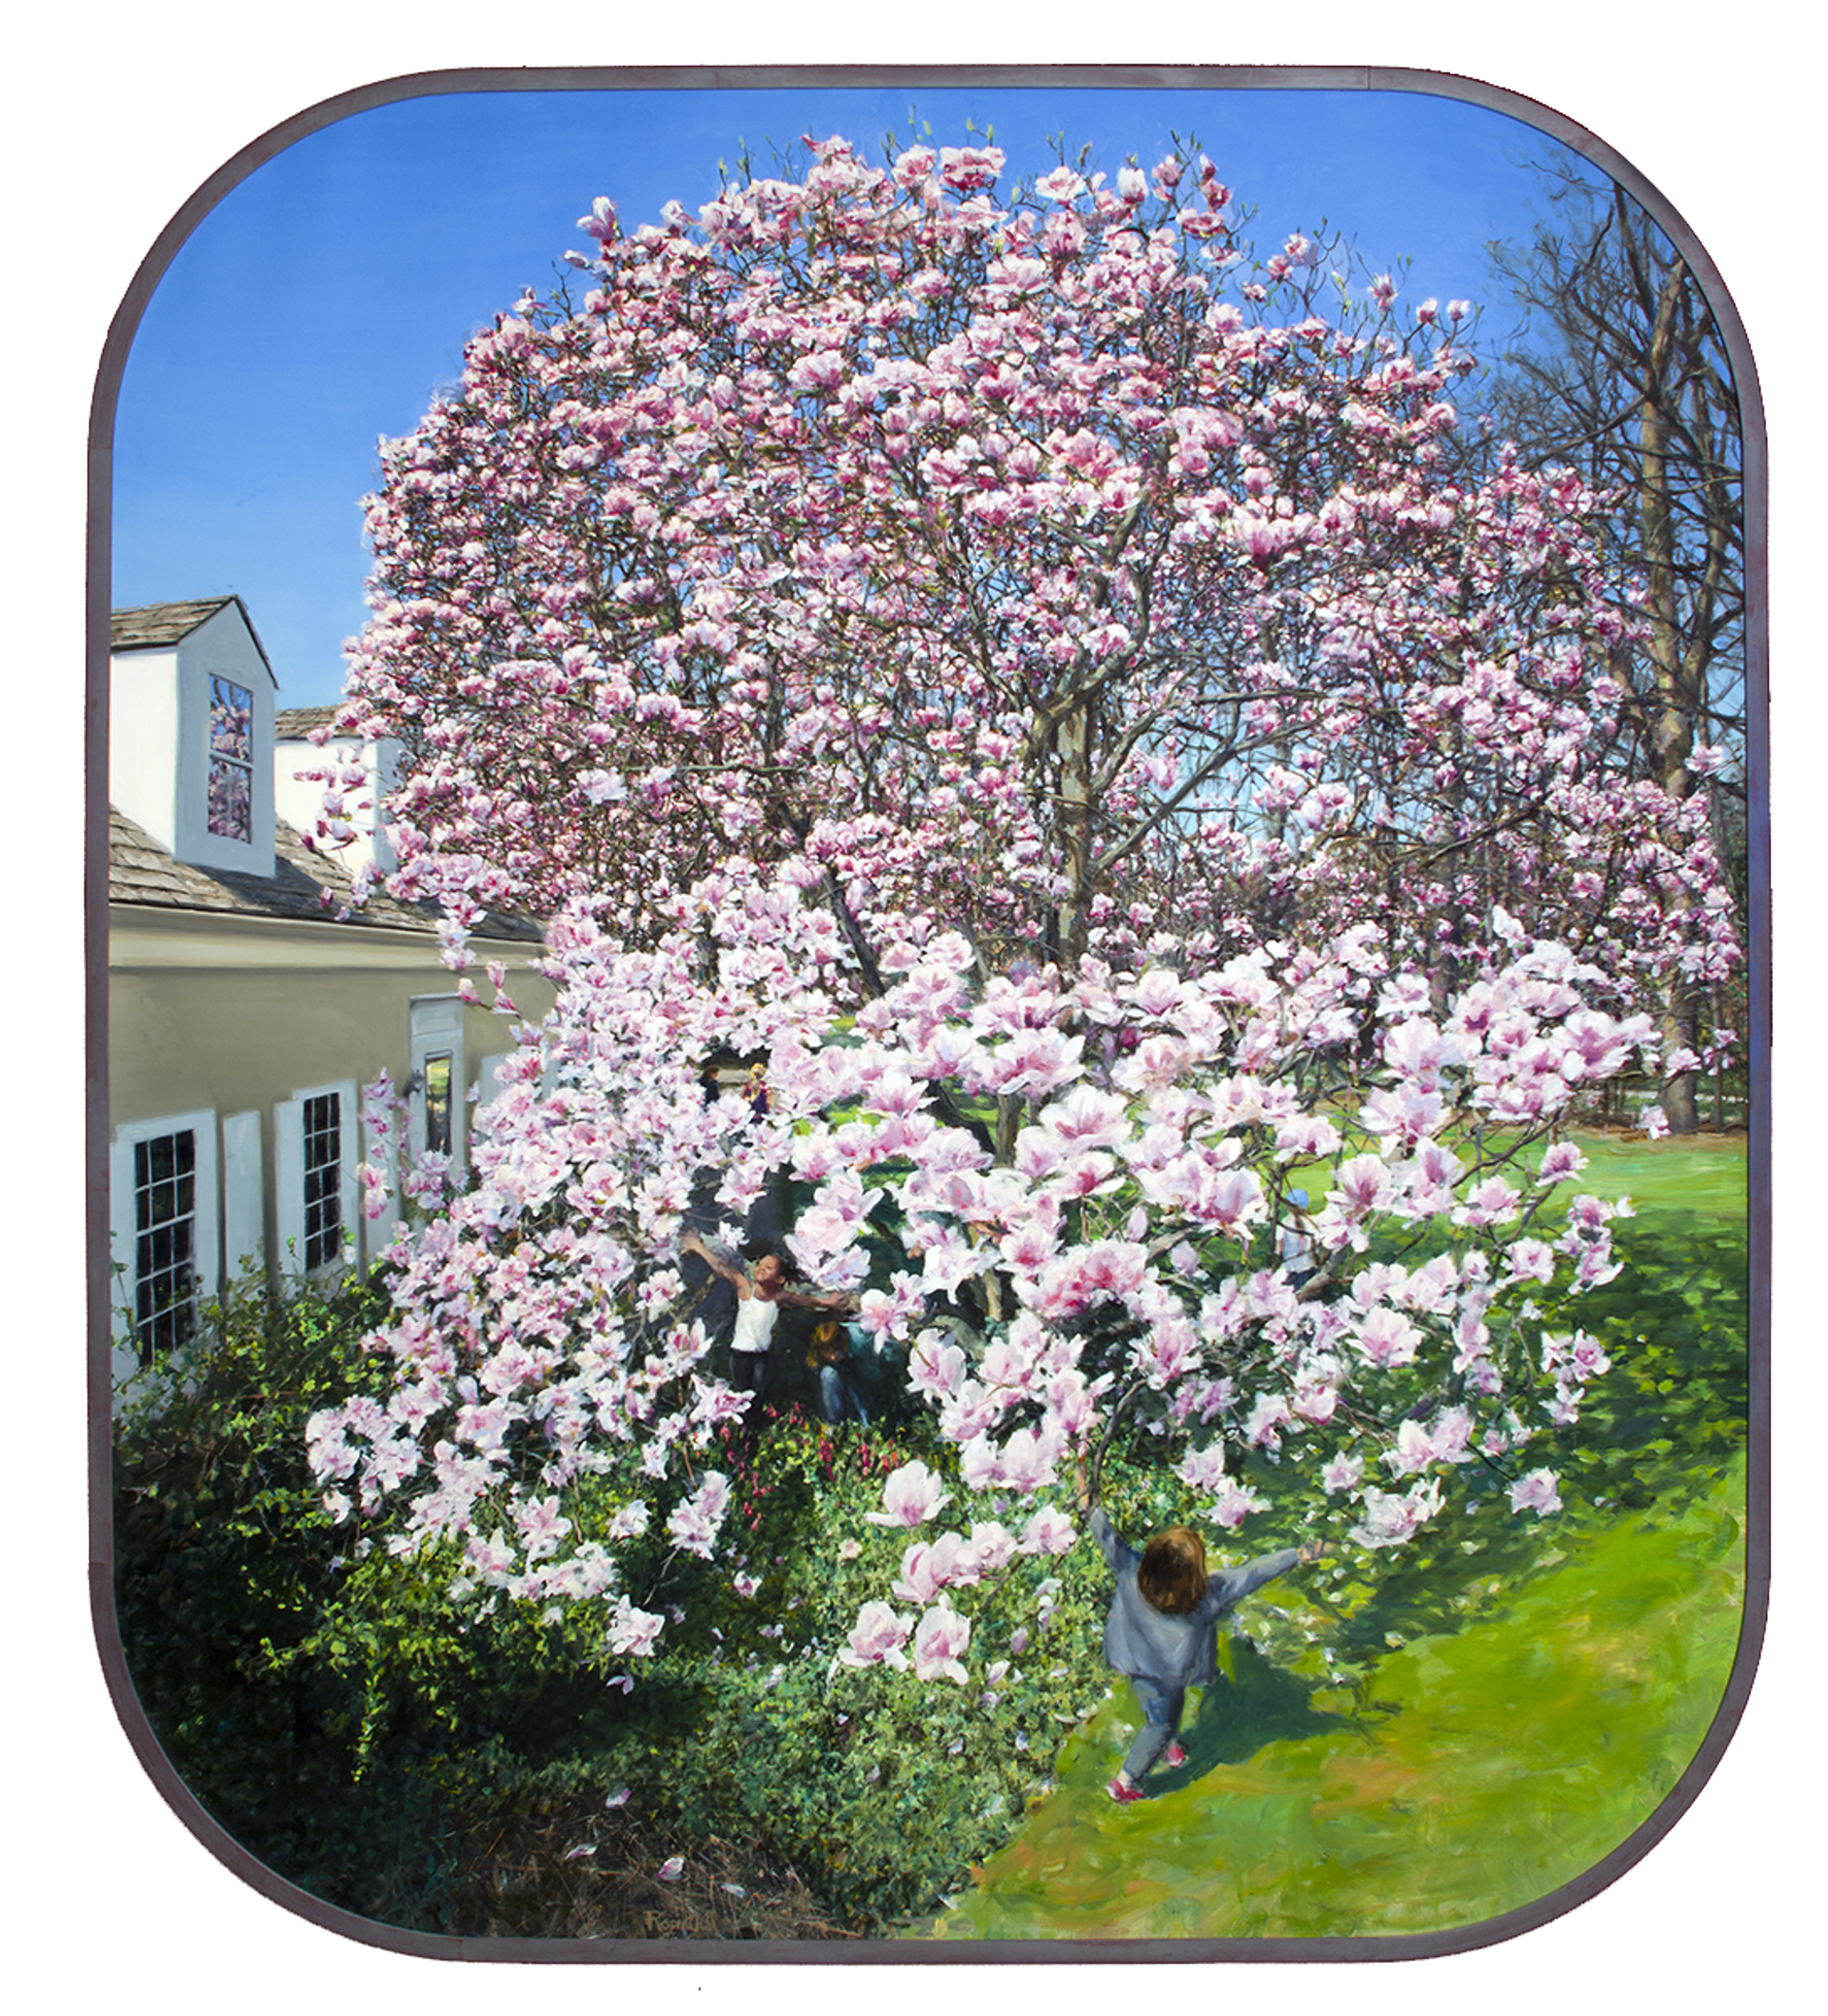 Playing Around the Magnolia by Sam Rosenthal